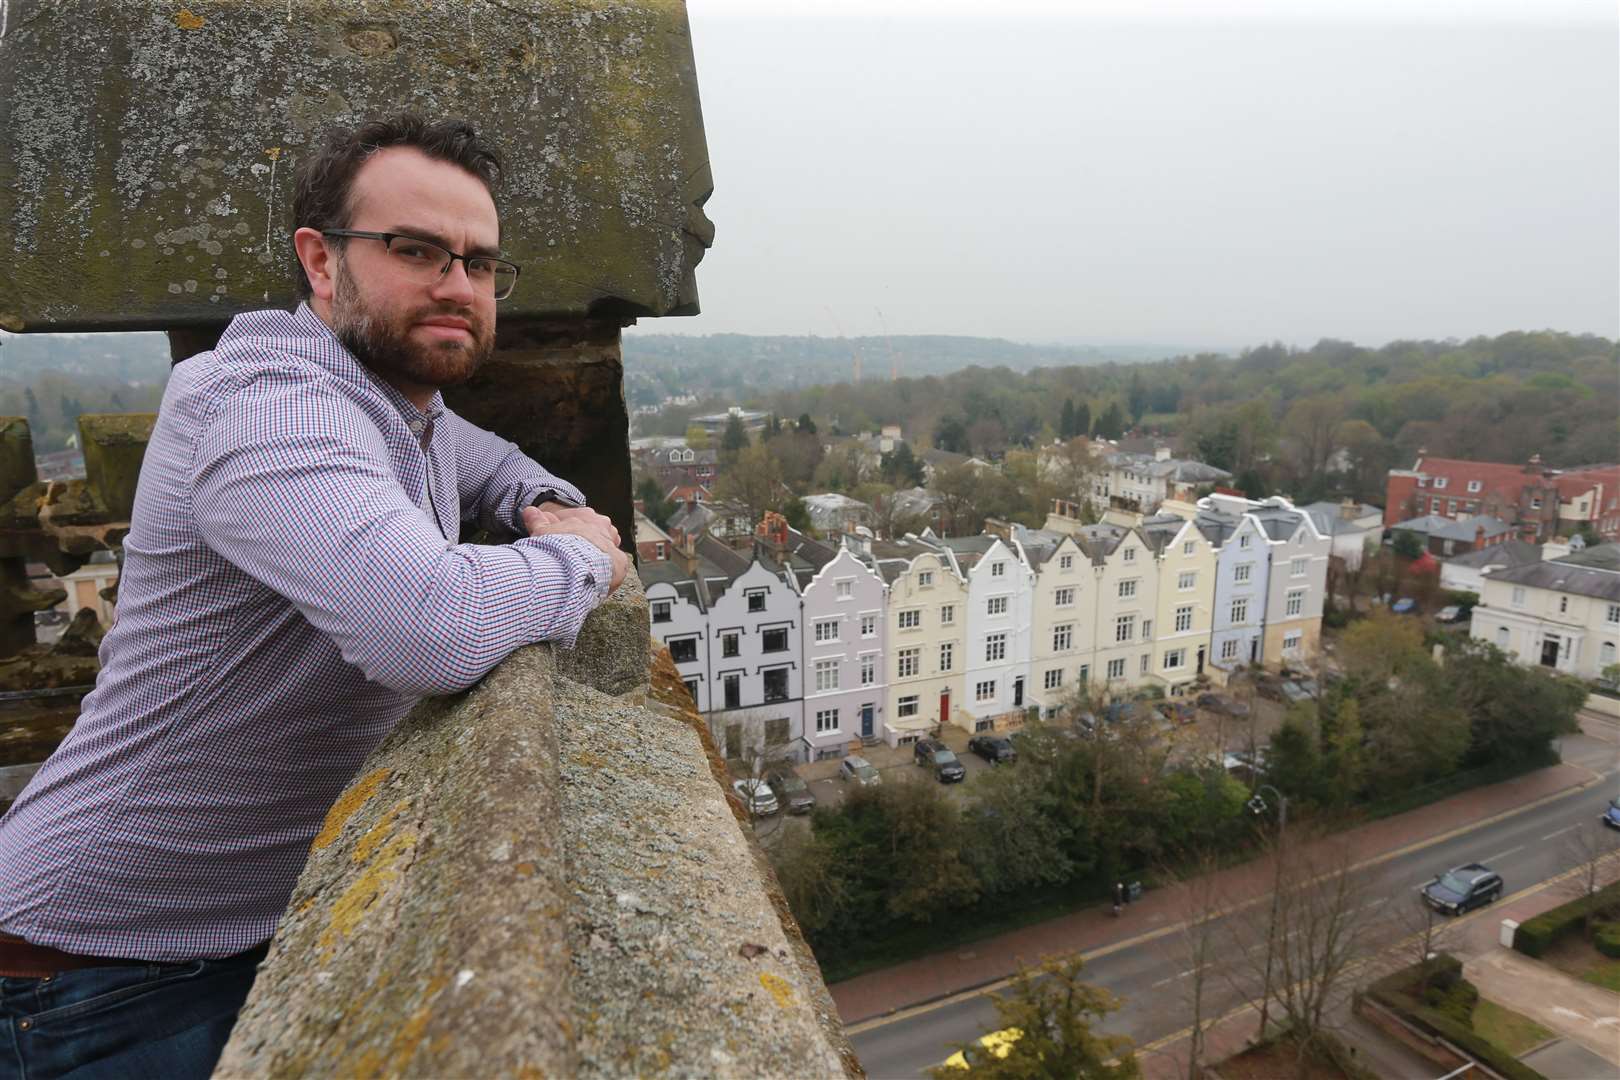 Alex Green, executive director of the Trinity Theatre stands at the top of the clock tower overlooking Tunbridge Wells